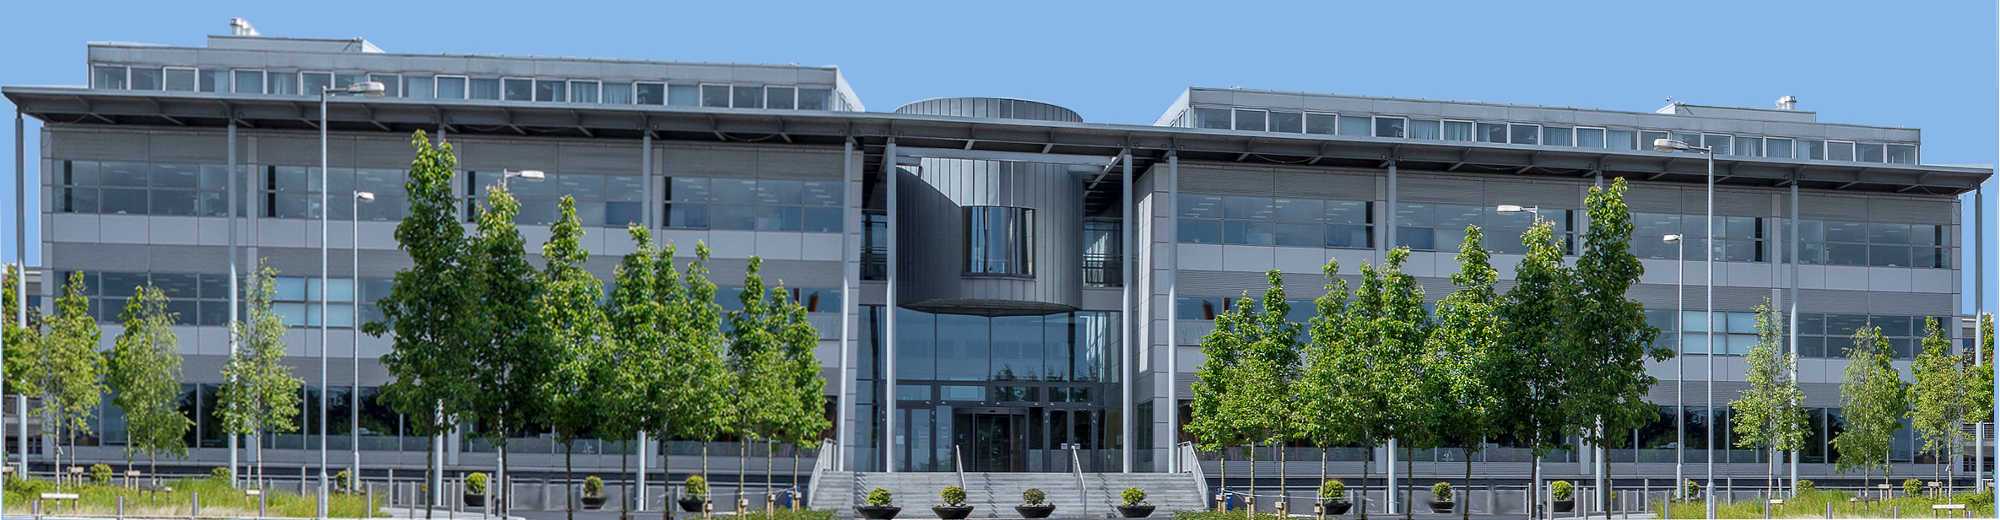 Stokes Building - DCU School of Electronic Engineering